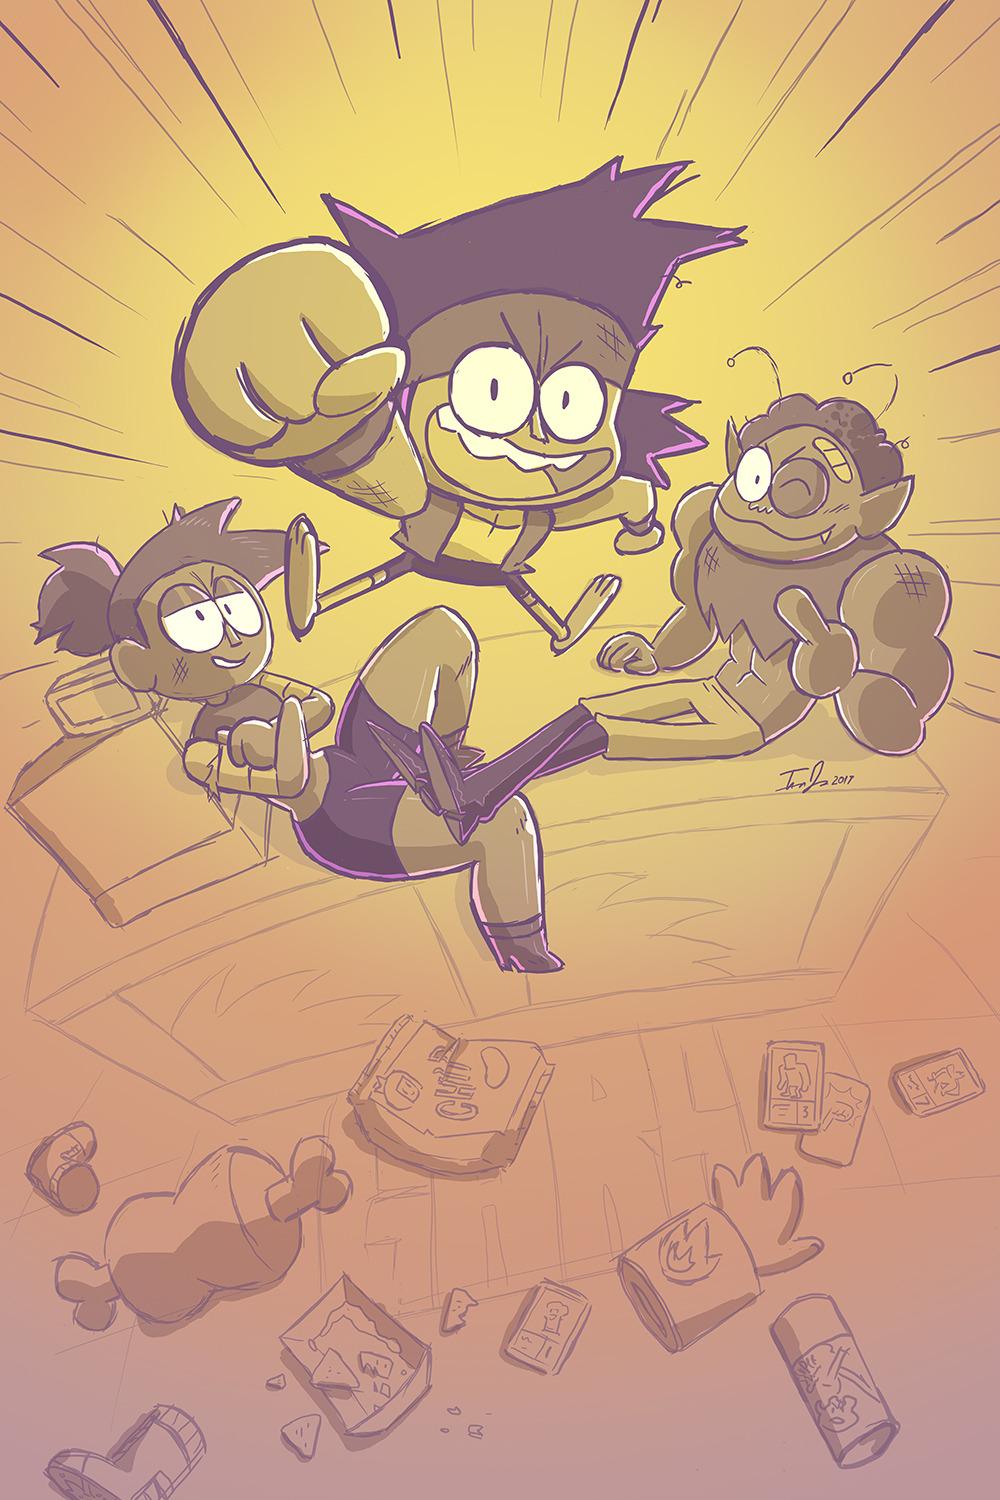 WELCOME. OK K.O.! Let's Be Heroes